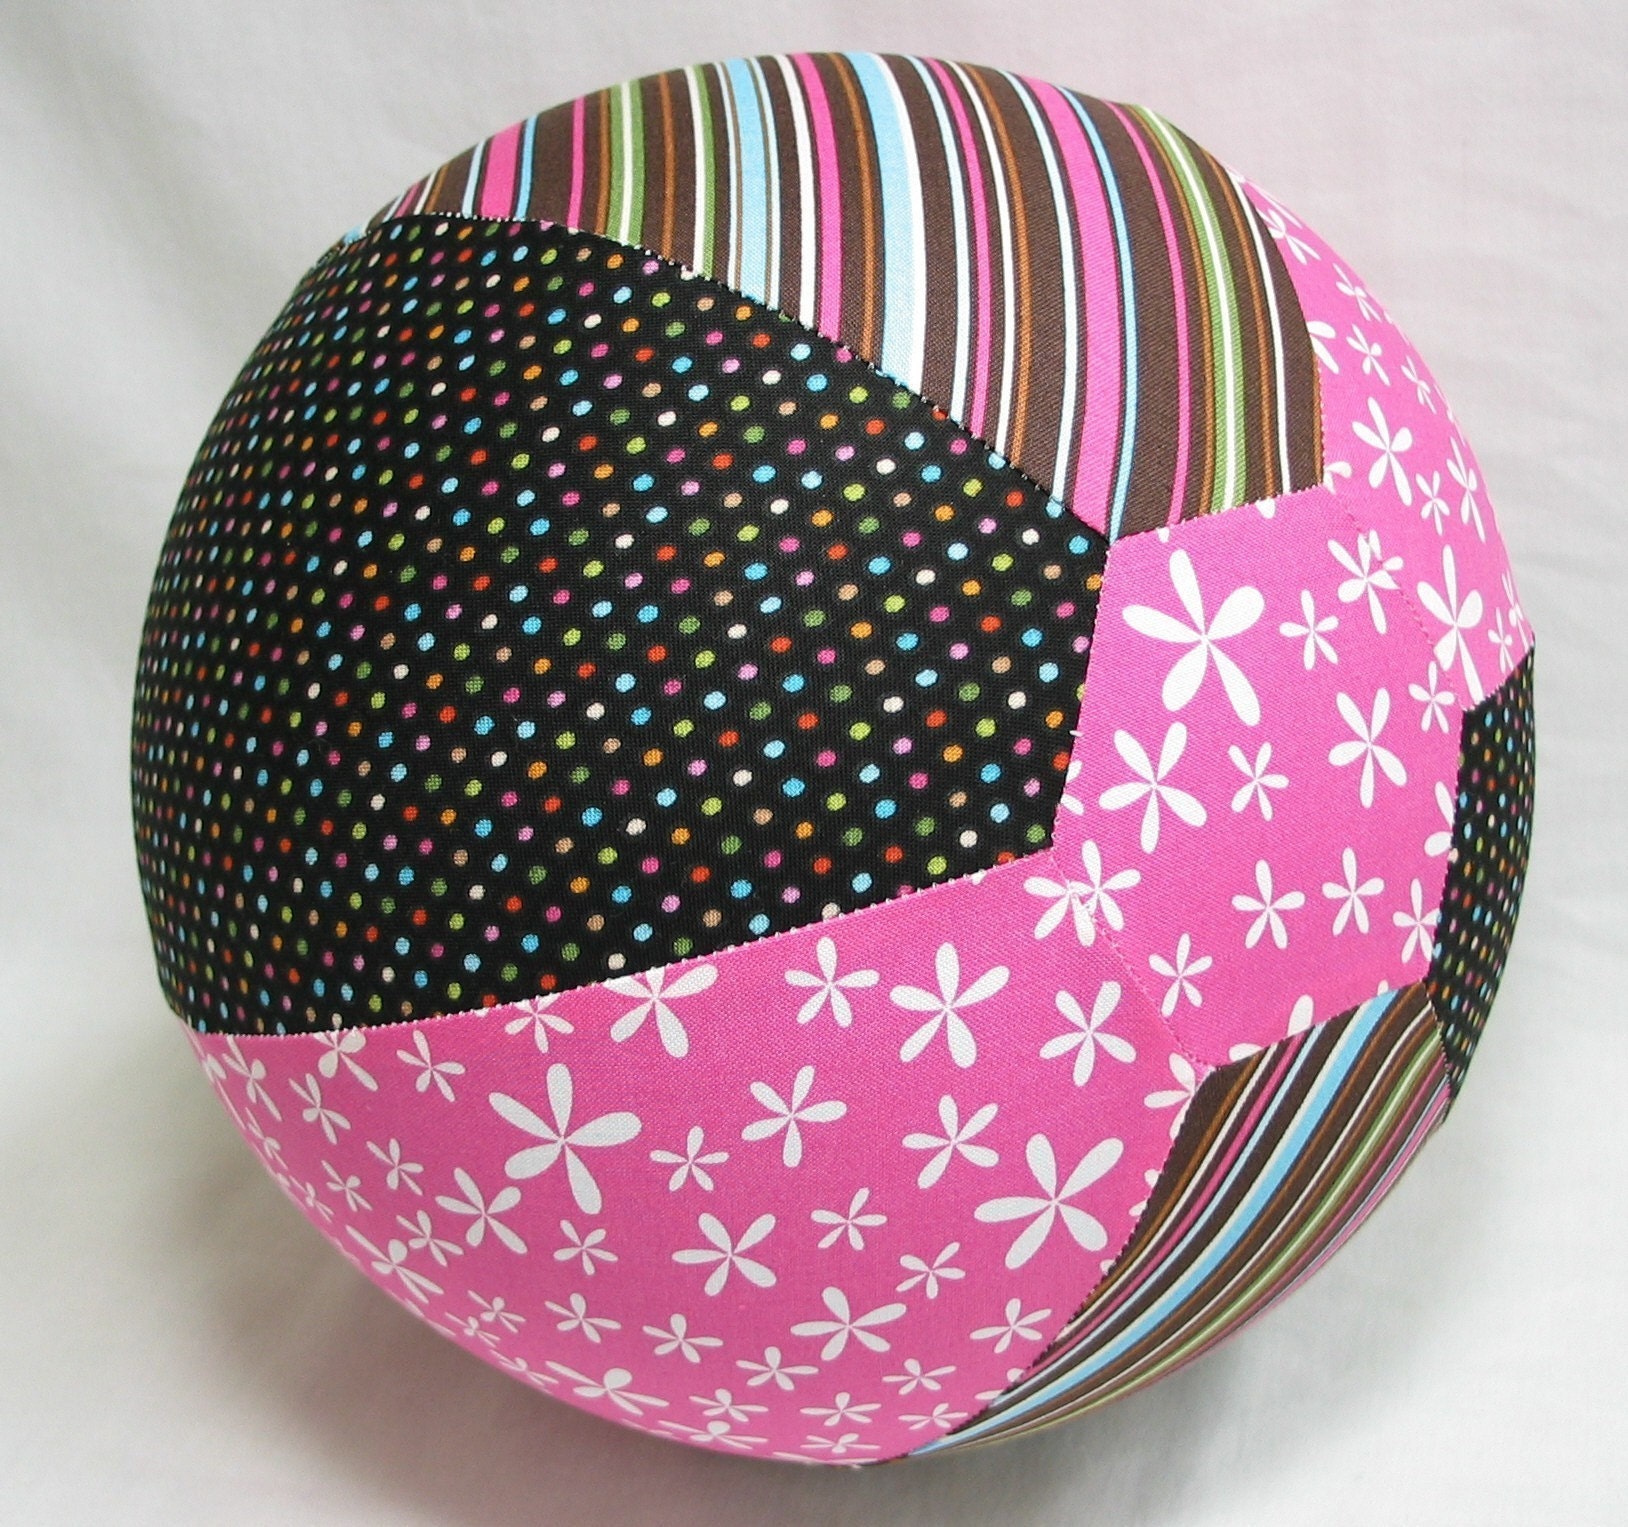 reserved for Christy - Balloon Ball TOY - Girly FUN Fabric - Hot Pink and Chocolate Brown